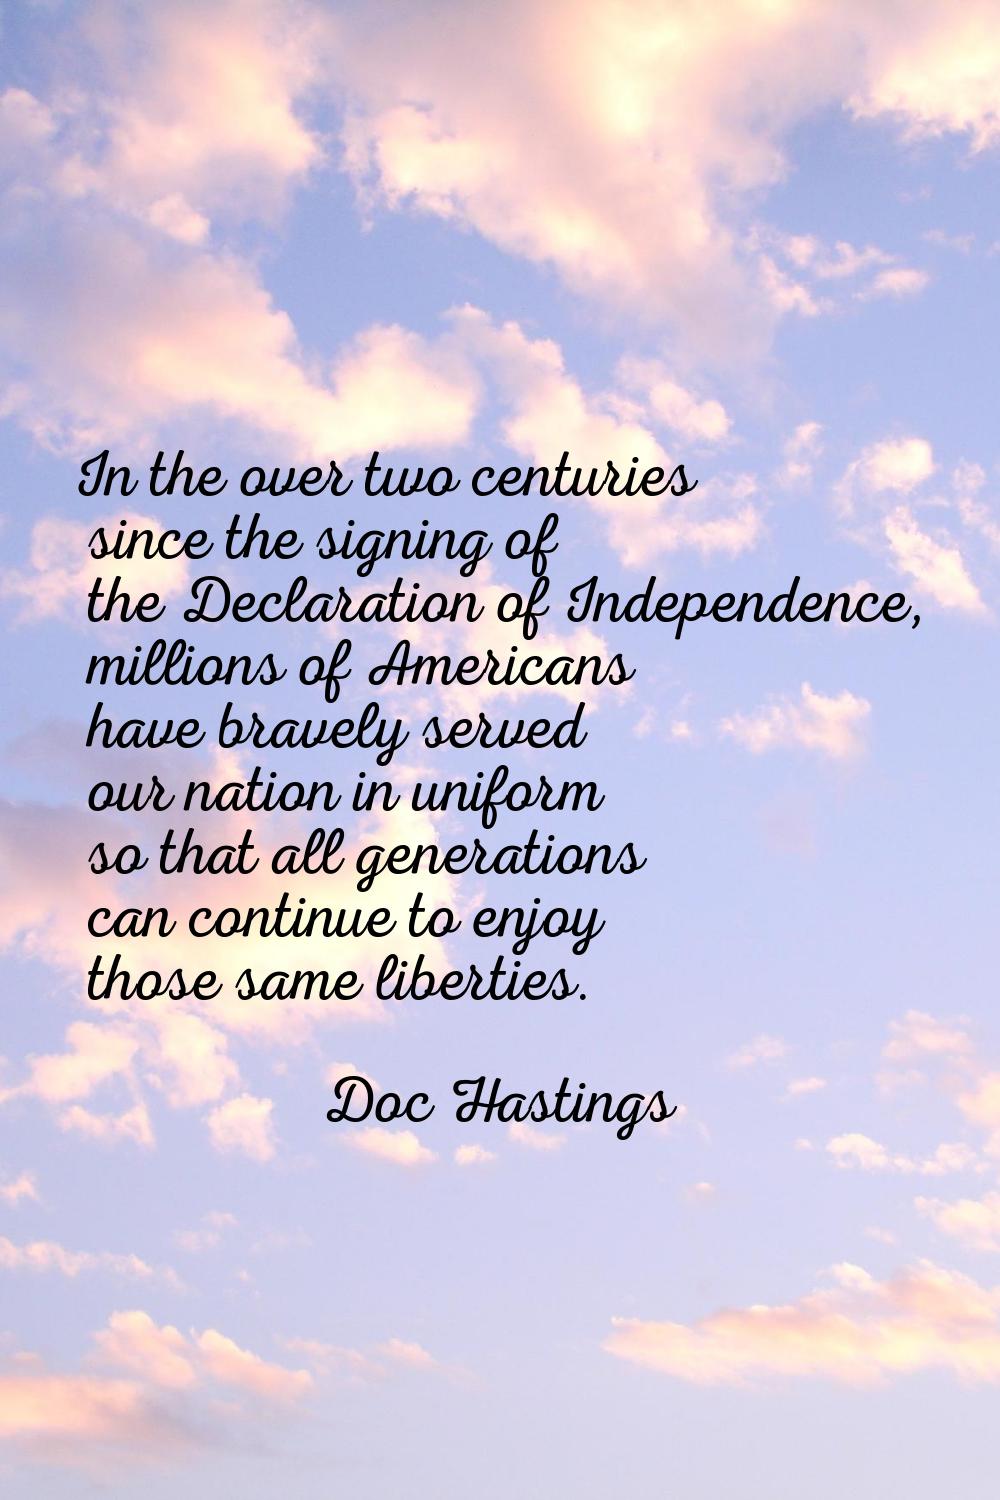 In the over two centuries since the signing of the Declaration of Independence, millions of America